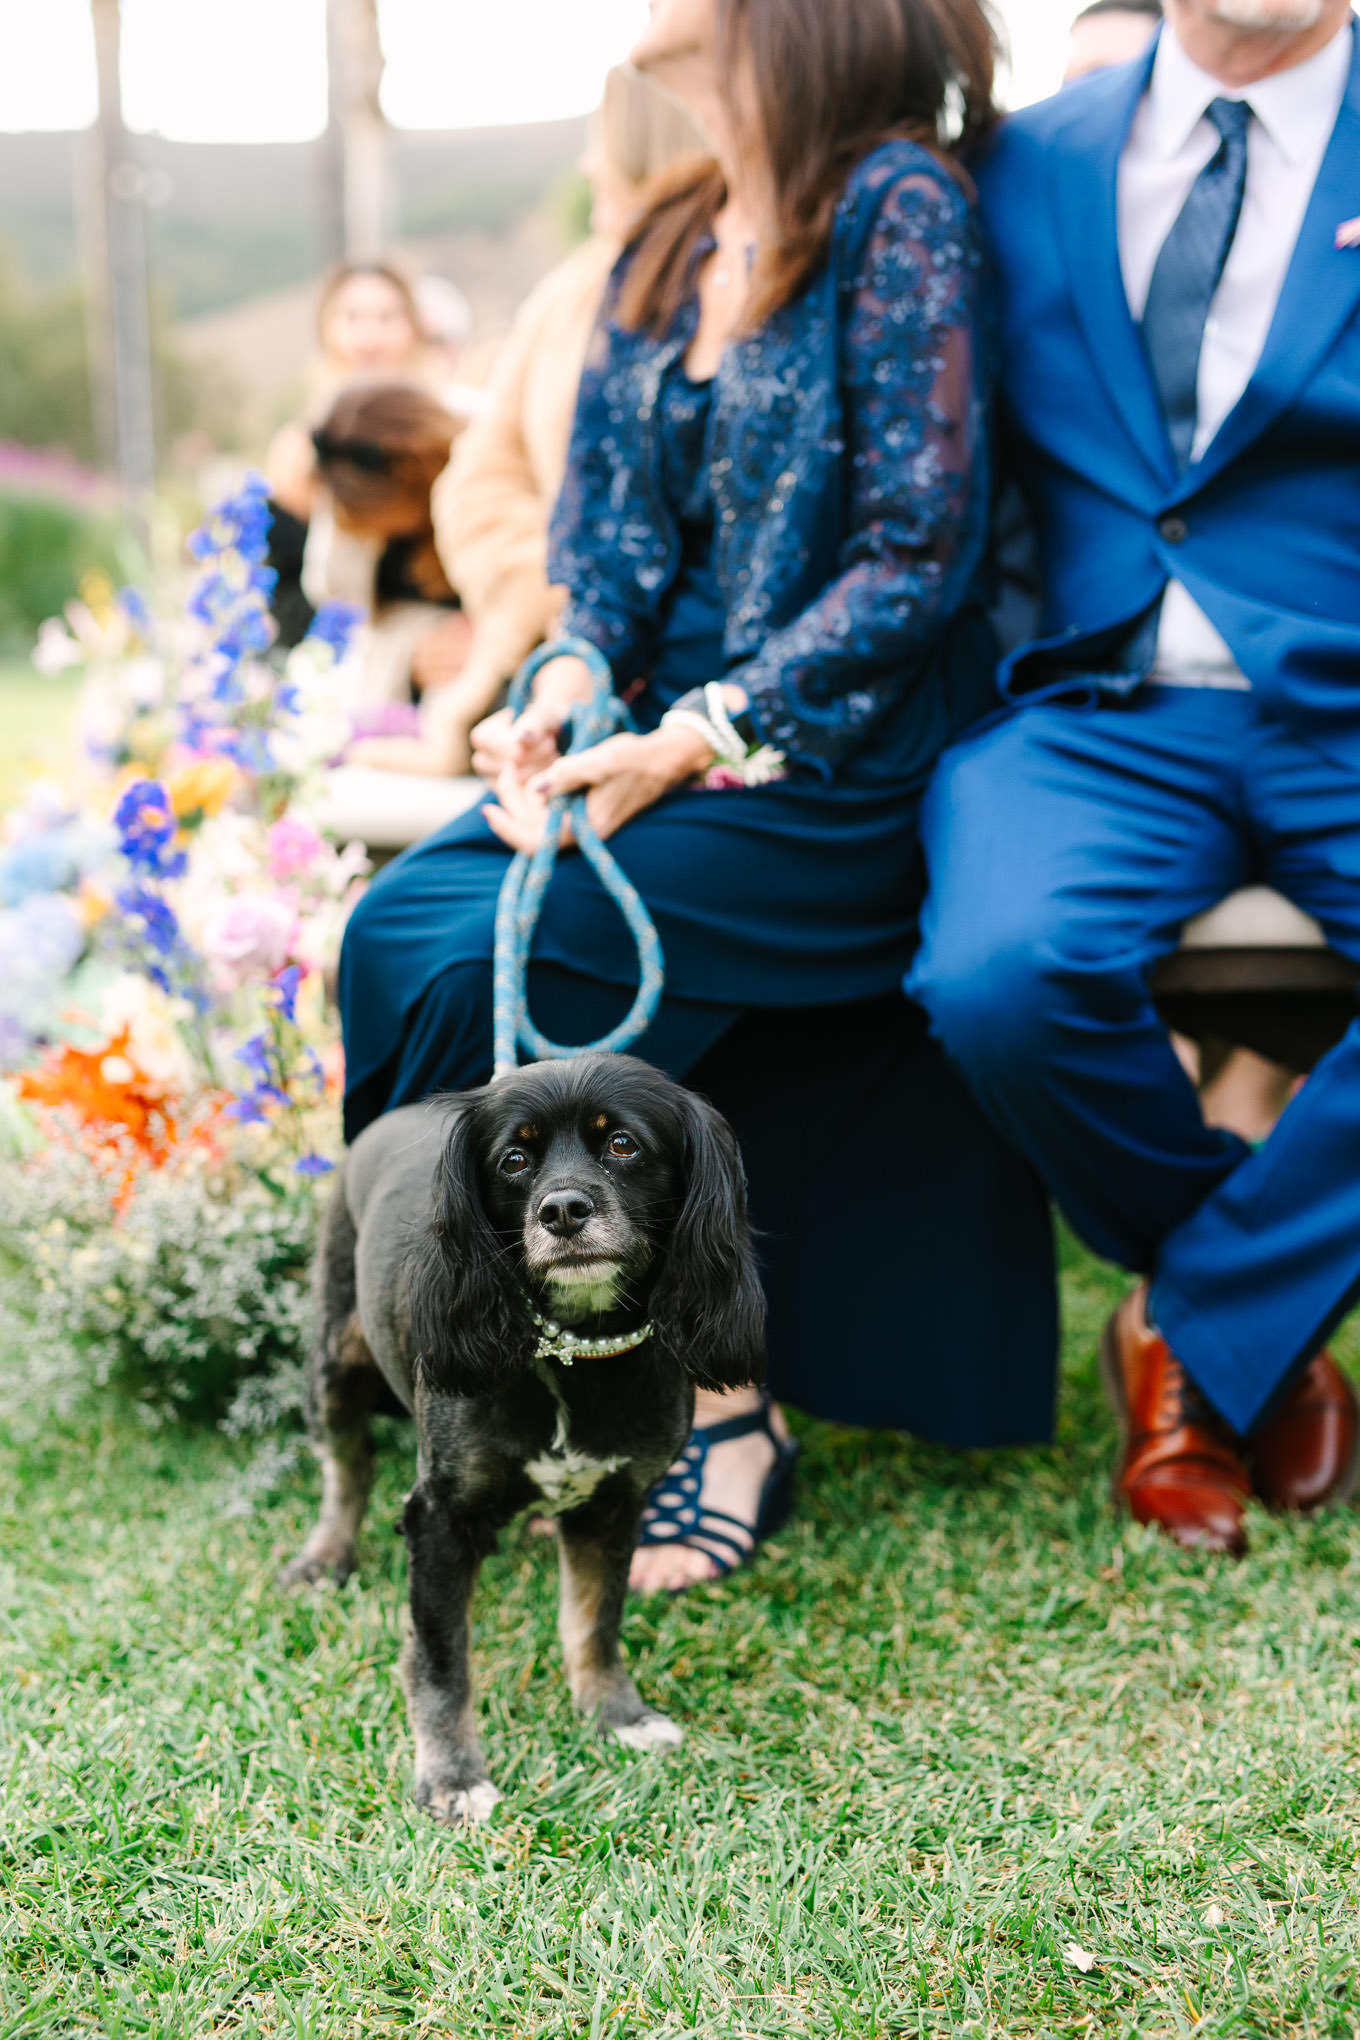 Dog at wedding ceremony | Colorful and quirky wedding at Higuera Ranch in San Luis Obispo | #sanluisobispowedding #californiawedding #higueraranch #madonnainn   
Source: Mary Costa Photography | Los Angeles